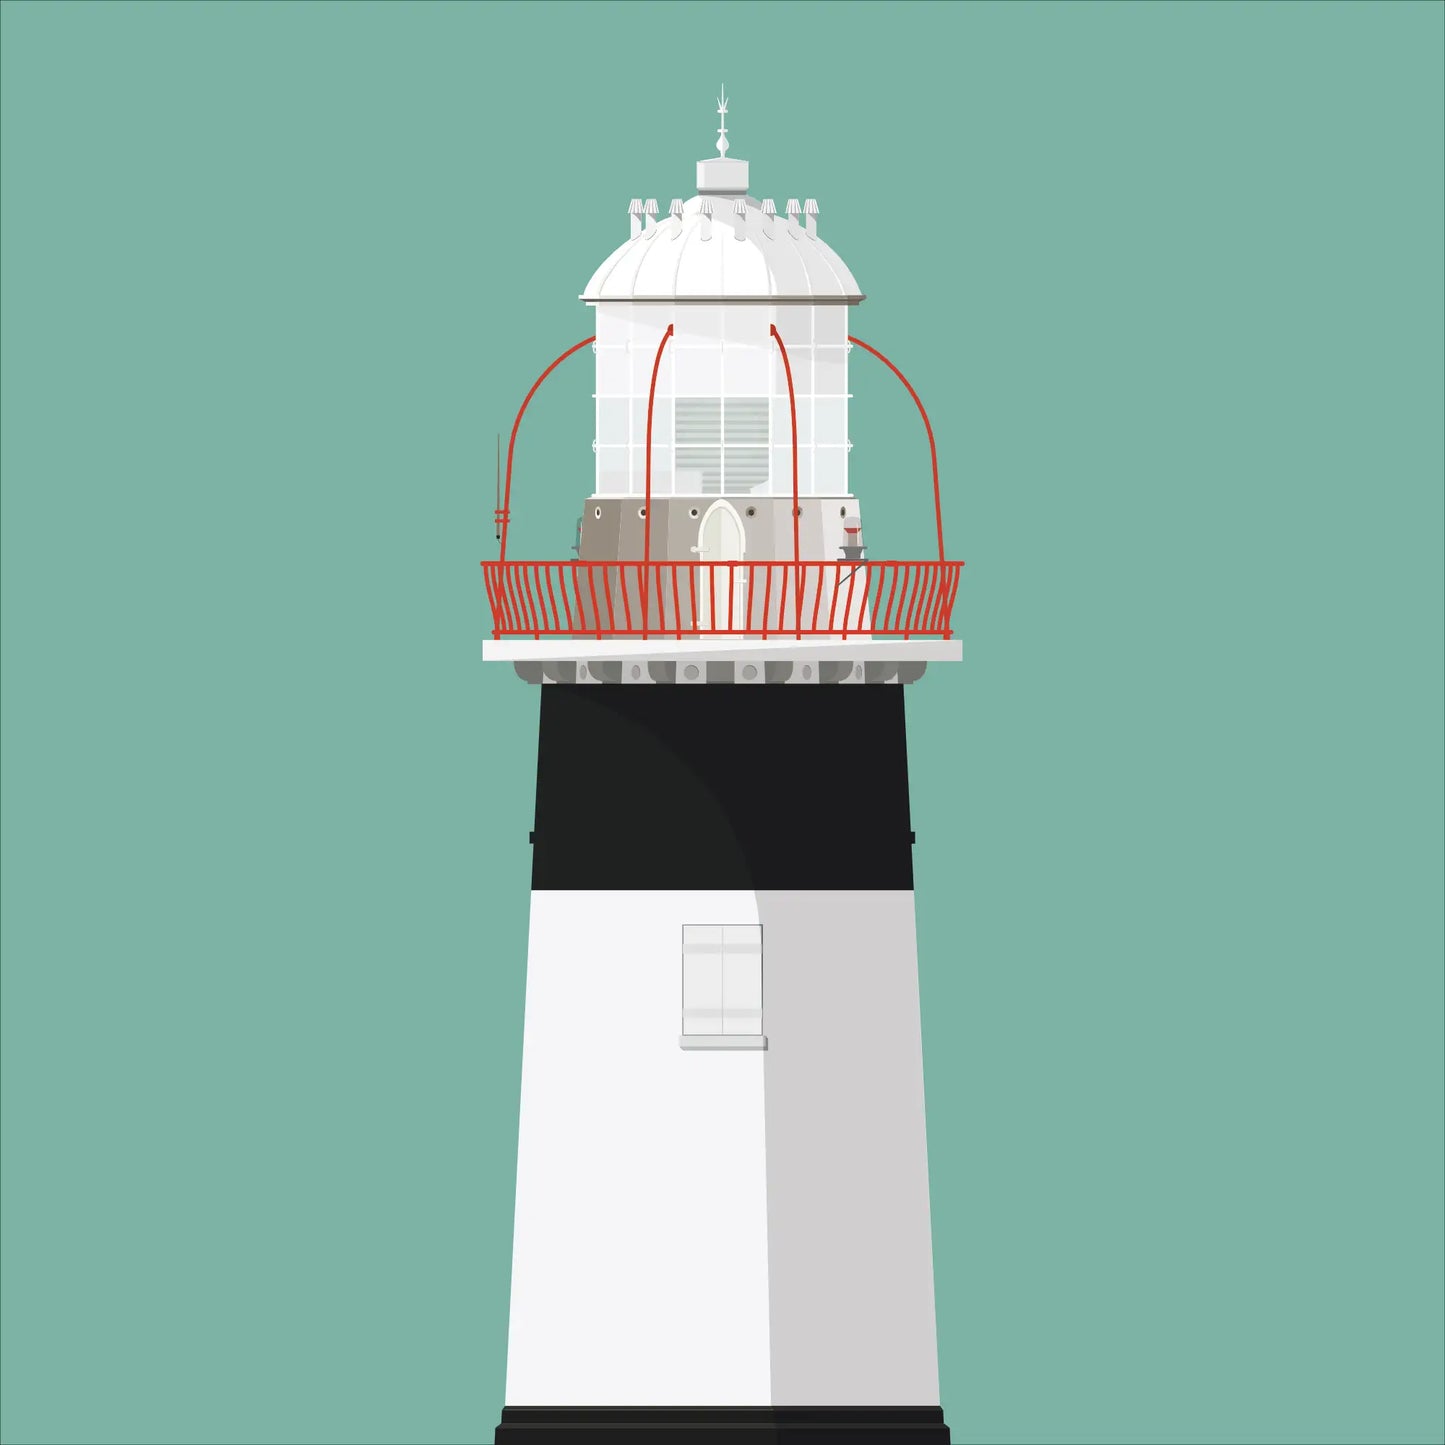 Illustration of Roancarrigmore lighthouse on a white background inside light blue square.